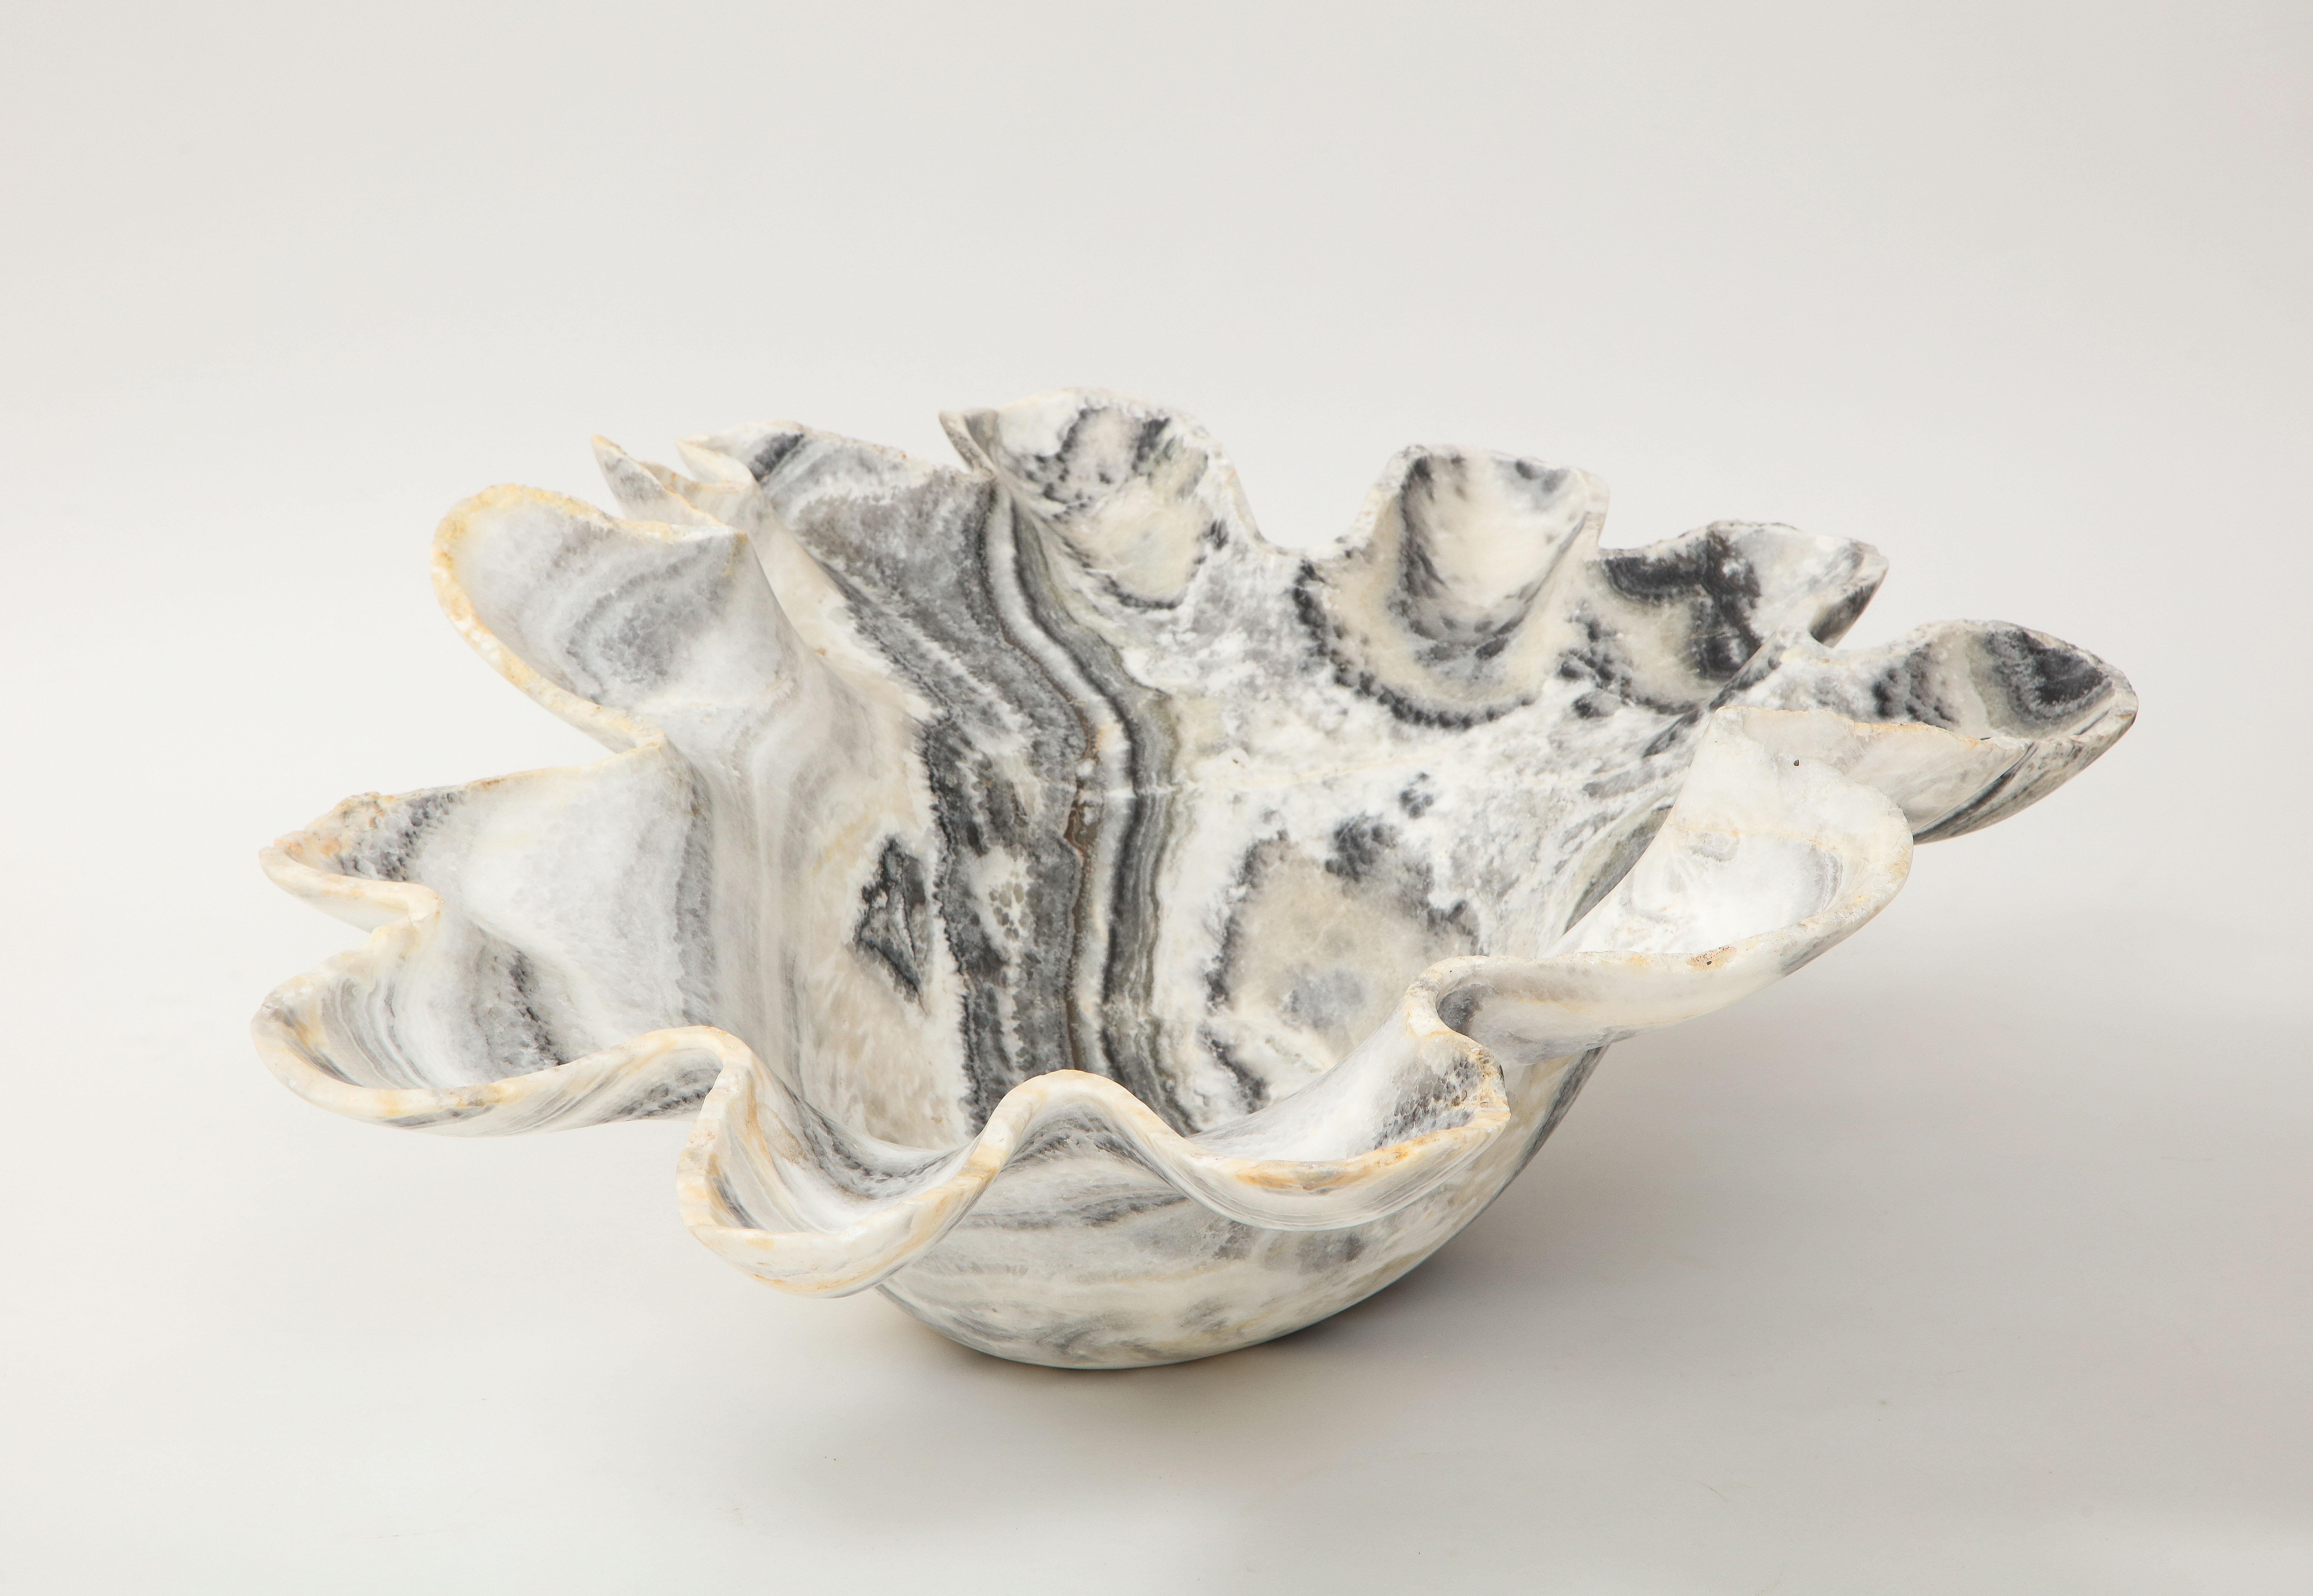 Contemporary Monumental Sculptural White, Gray and Black Hand Carved Onyx Bowl or Centerpiece